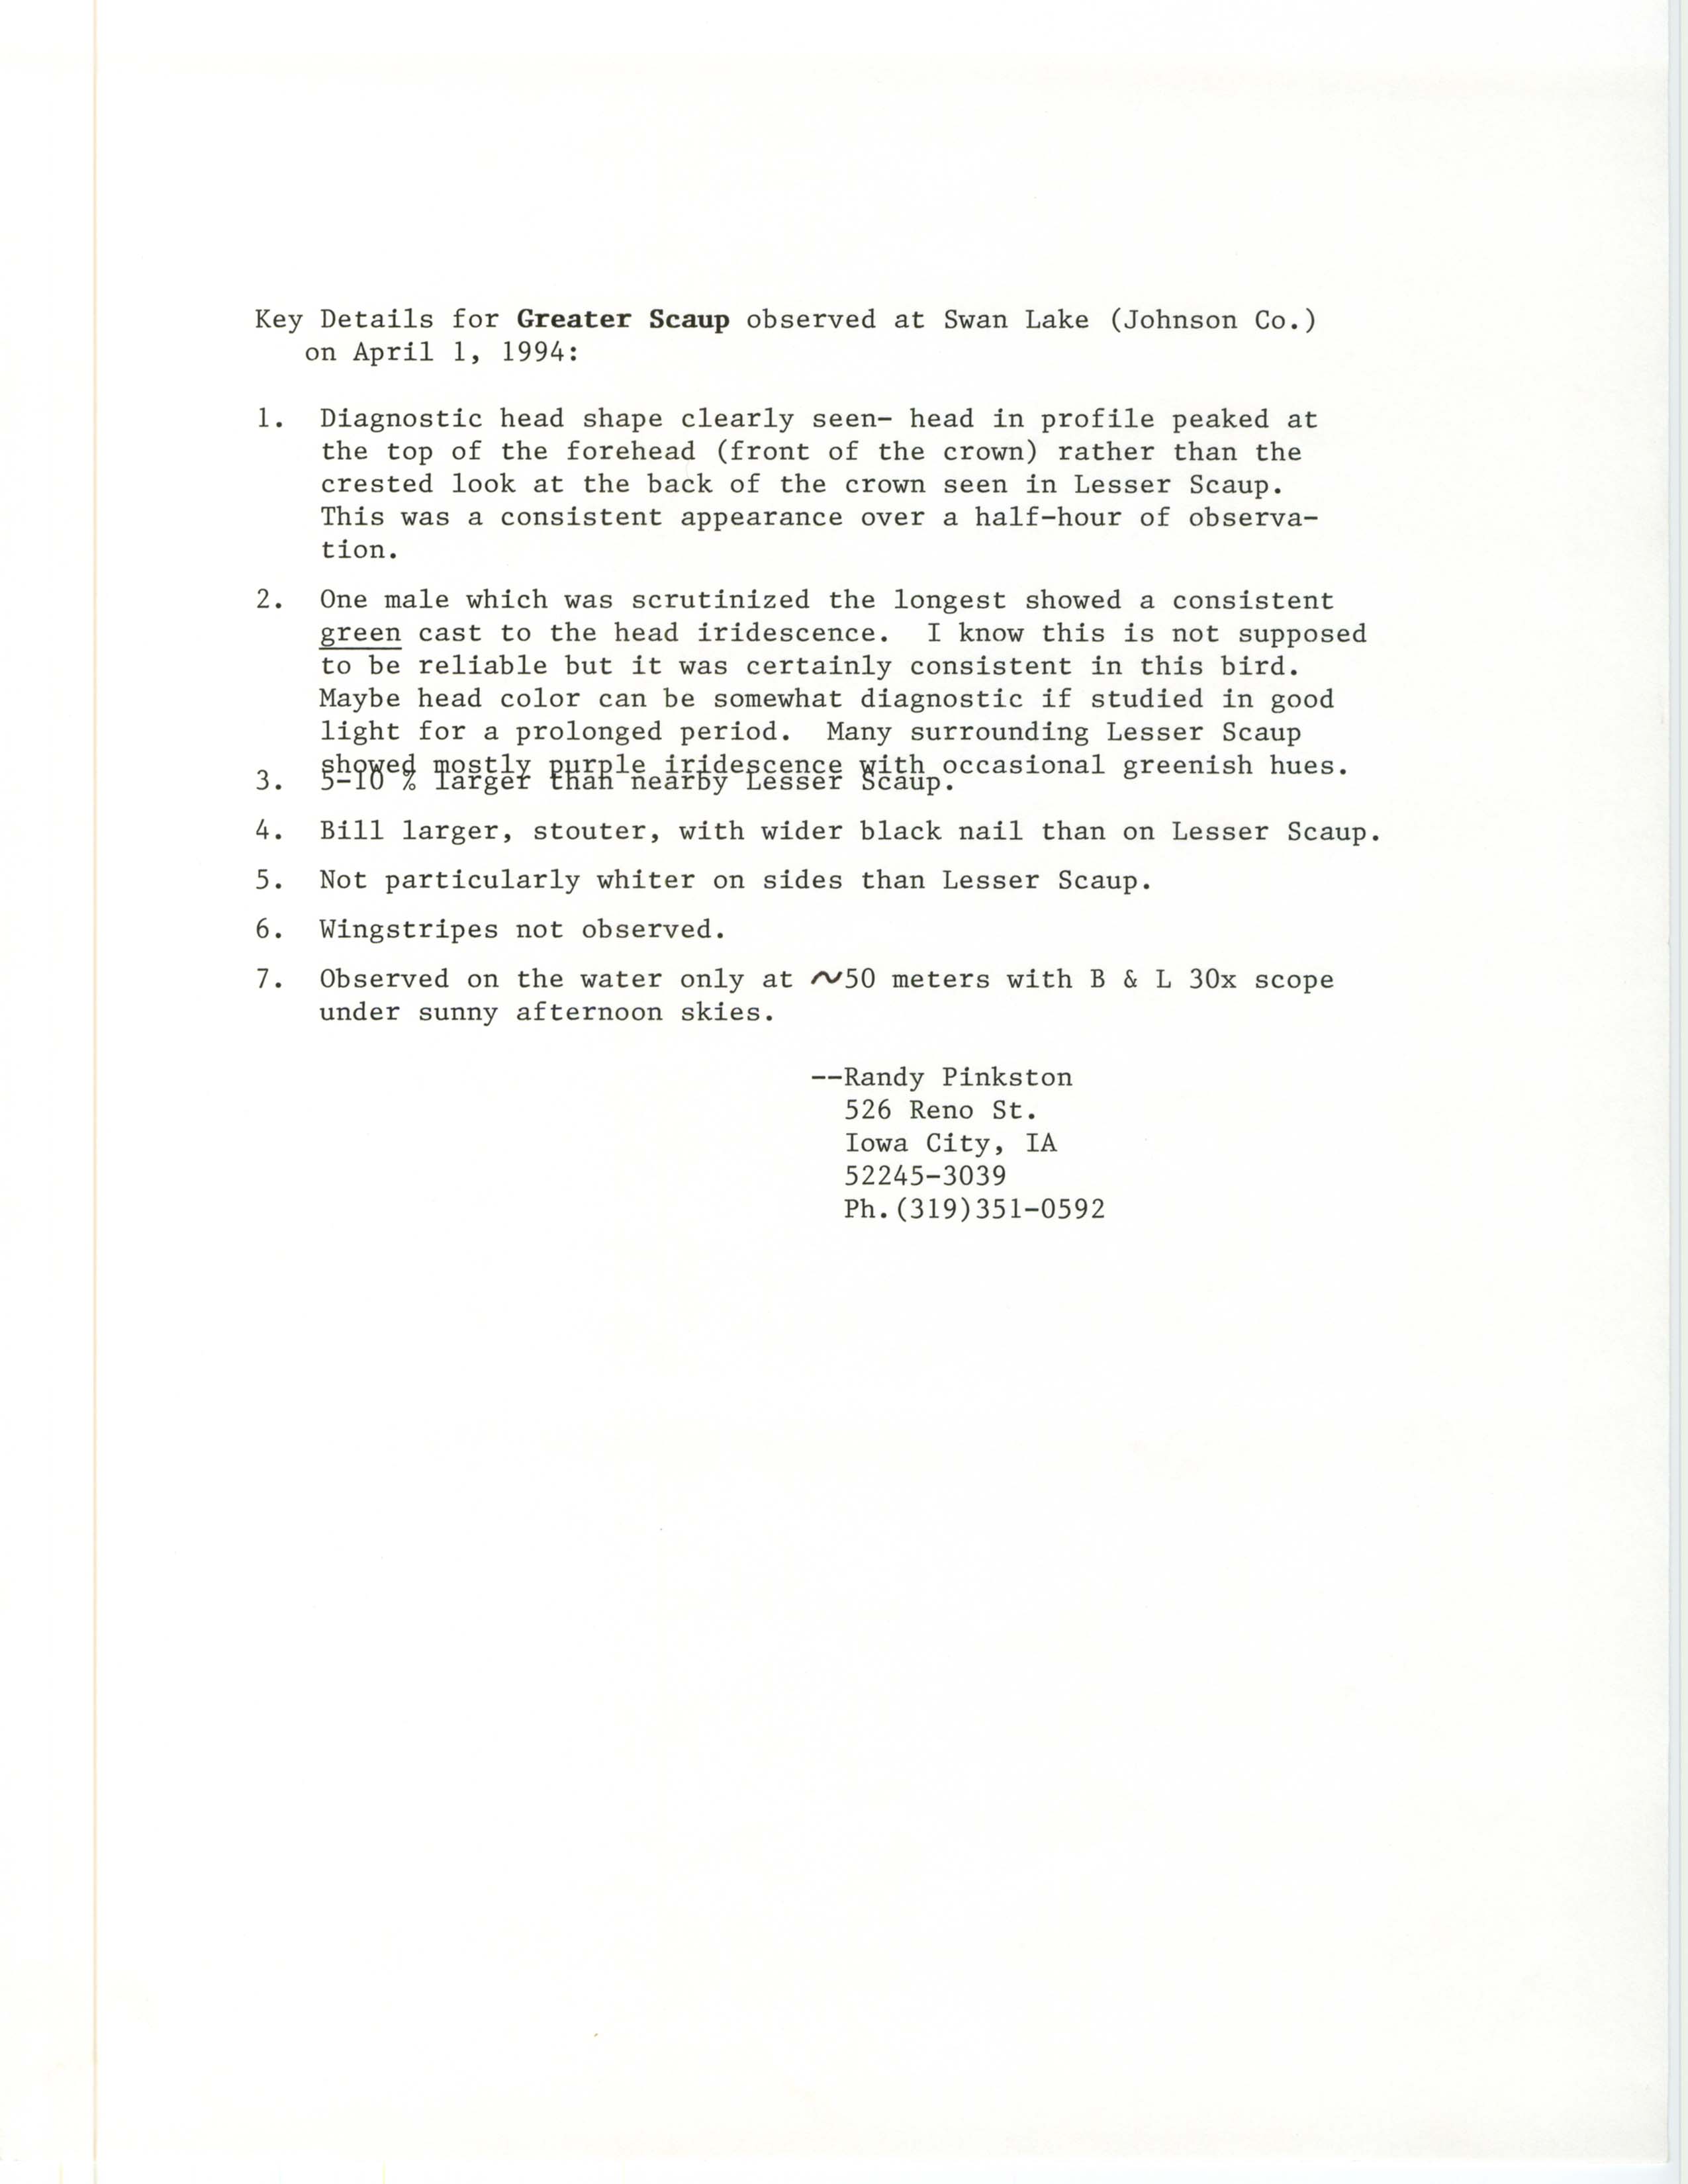 Rare bird documentation form for Greater Scaup at Swan Lake in 1994